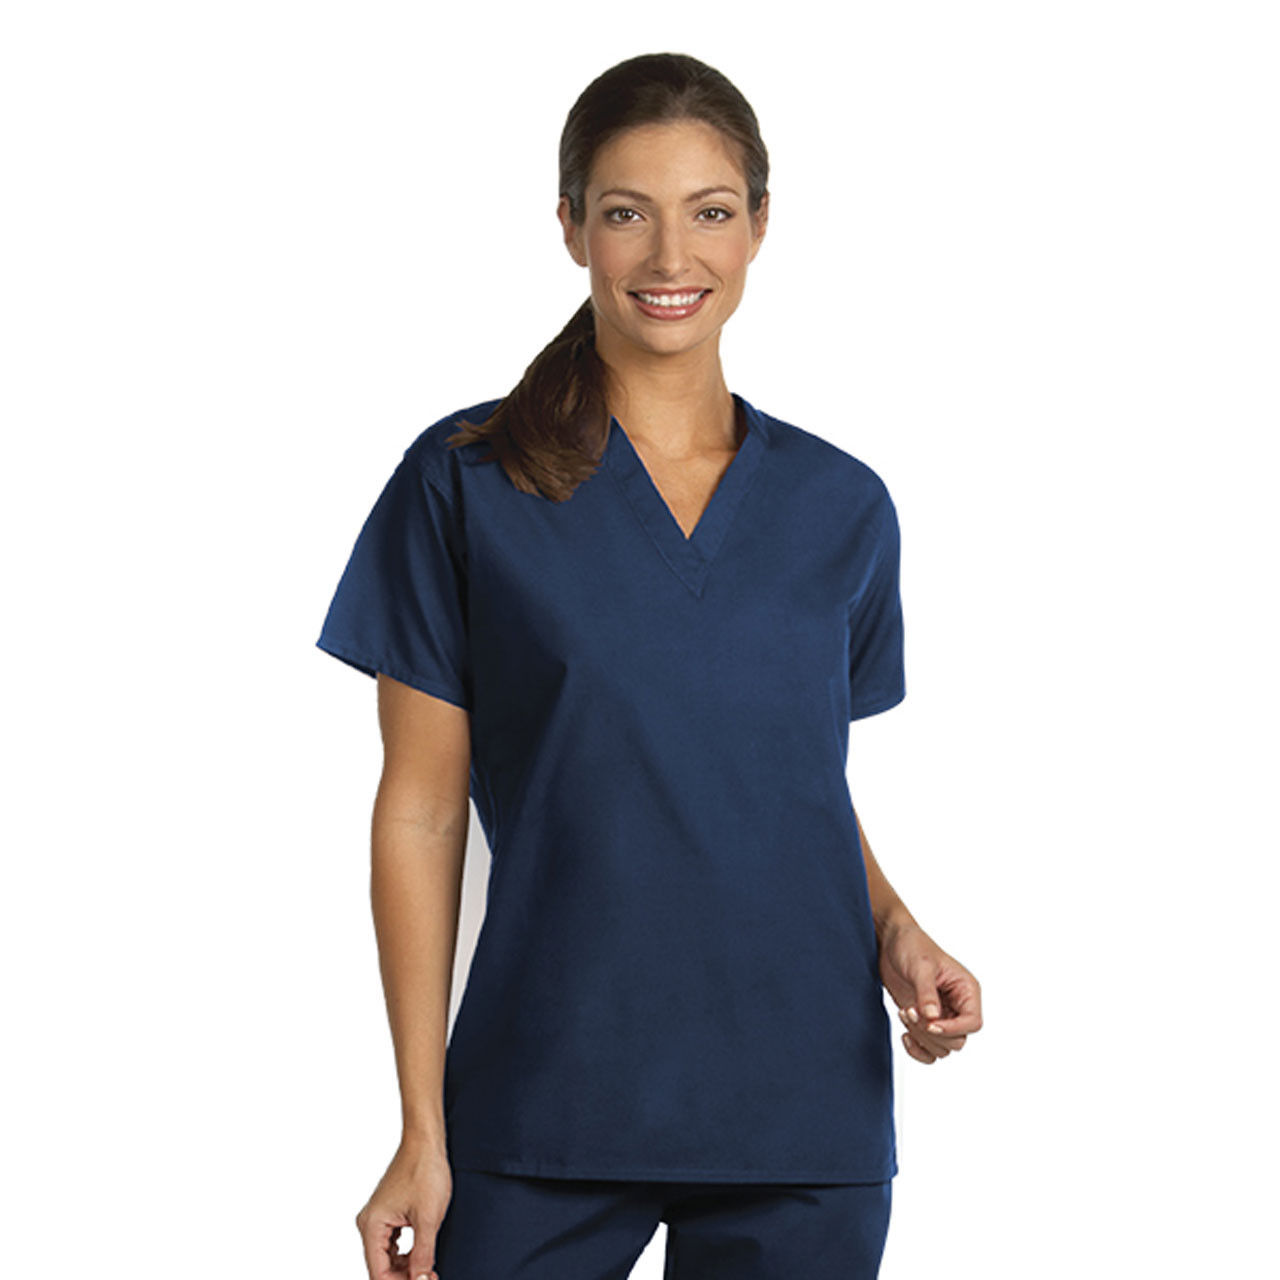 Is the neck style of these cheap navy blue scrubs reversible v-neck?